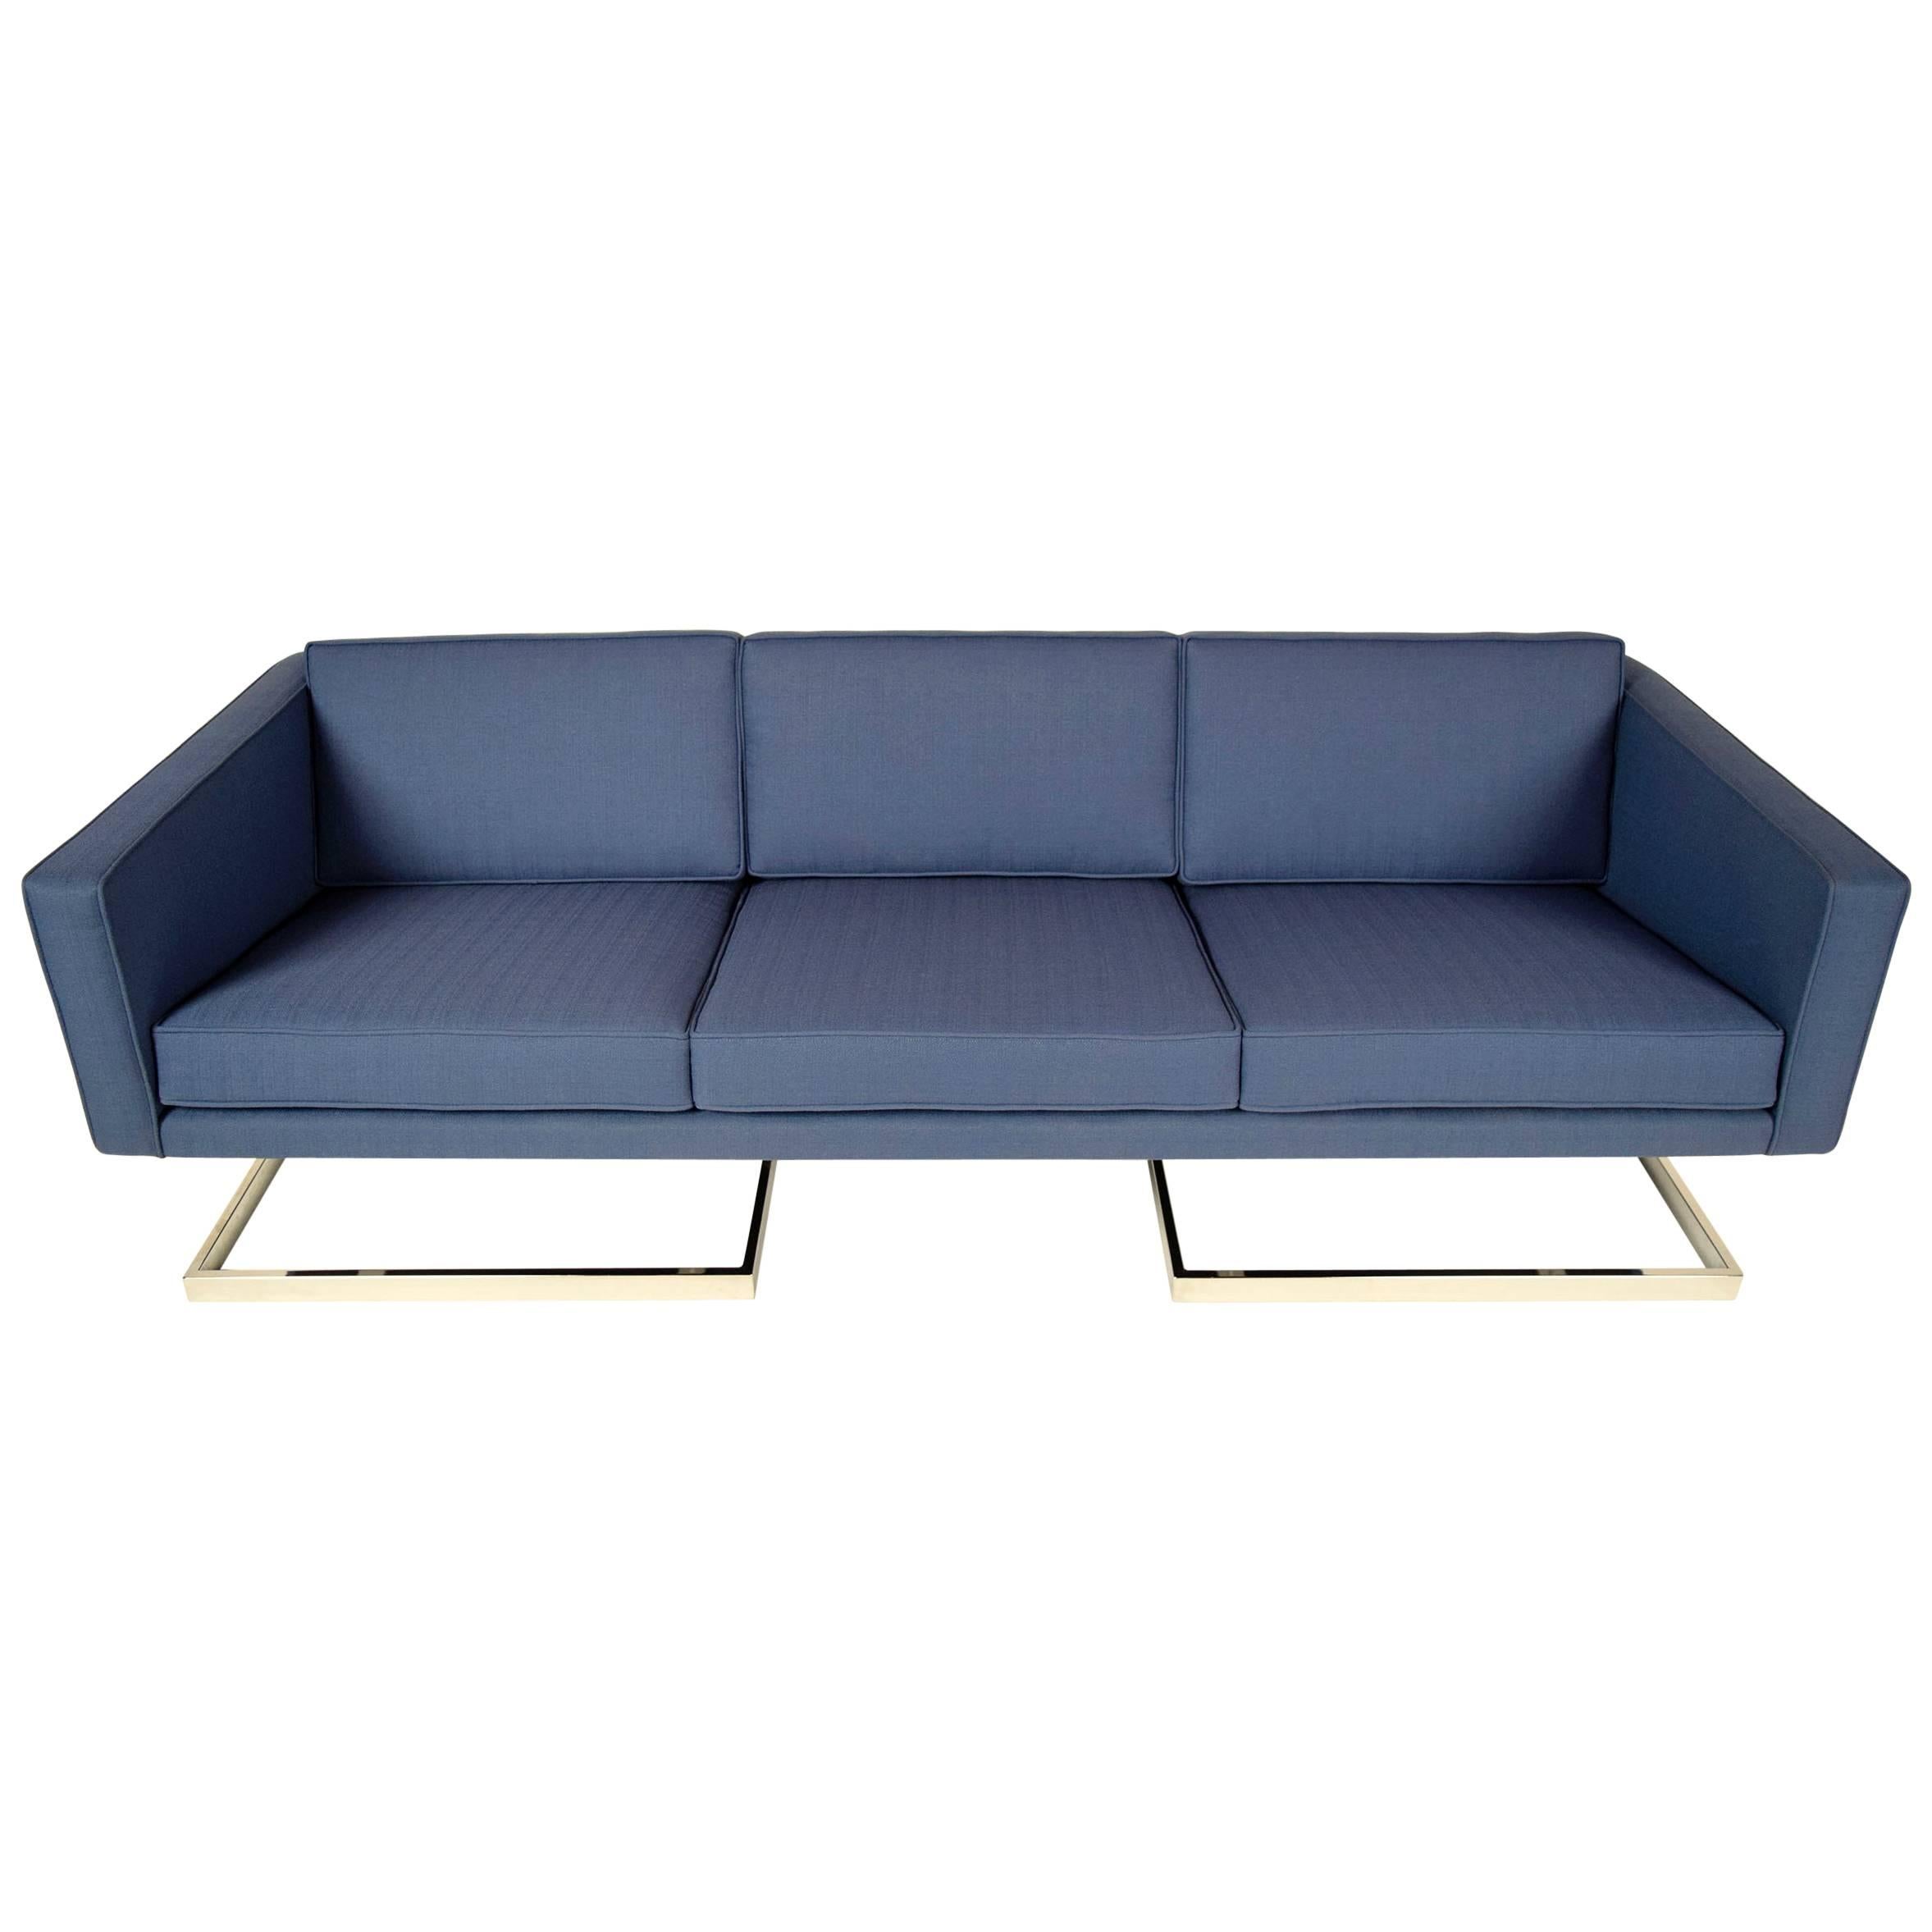 This modern 1960s Milo Baughman style sofa has been professionally reupholstered in a blue fabric with single piping details and features three seating cushions & three loose cushions on the back. This sofa also has new foam inserts that are very